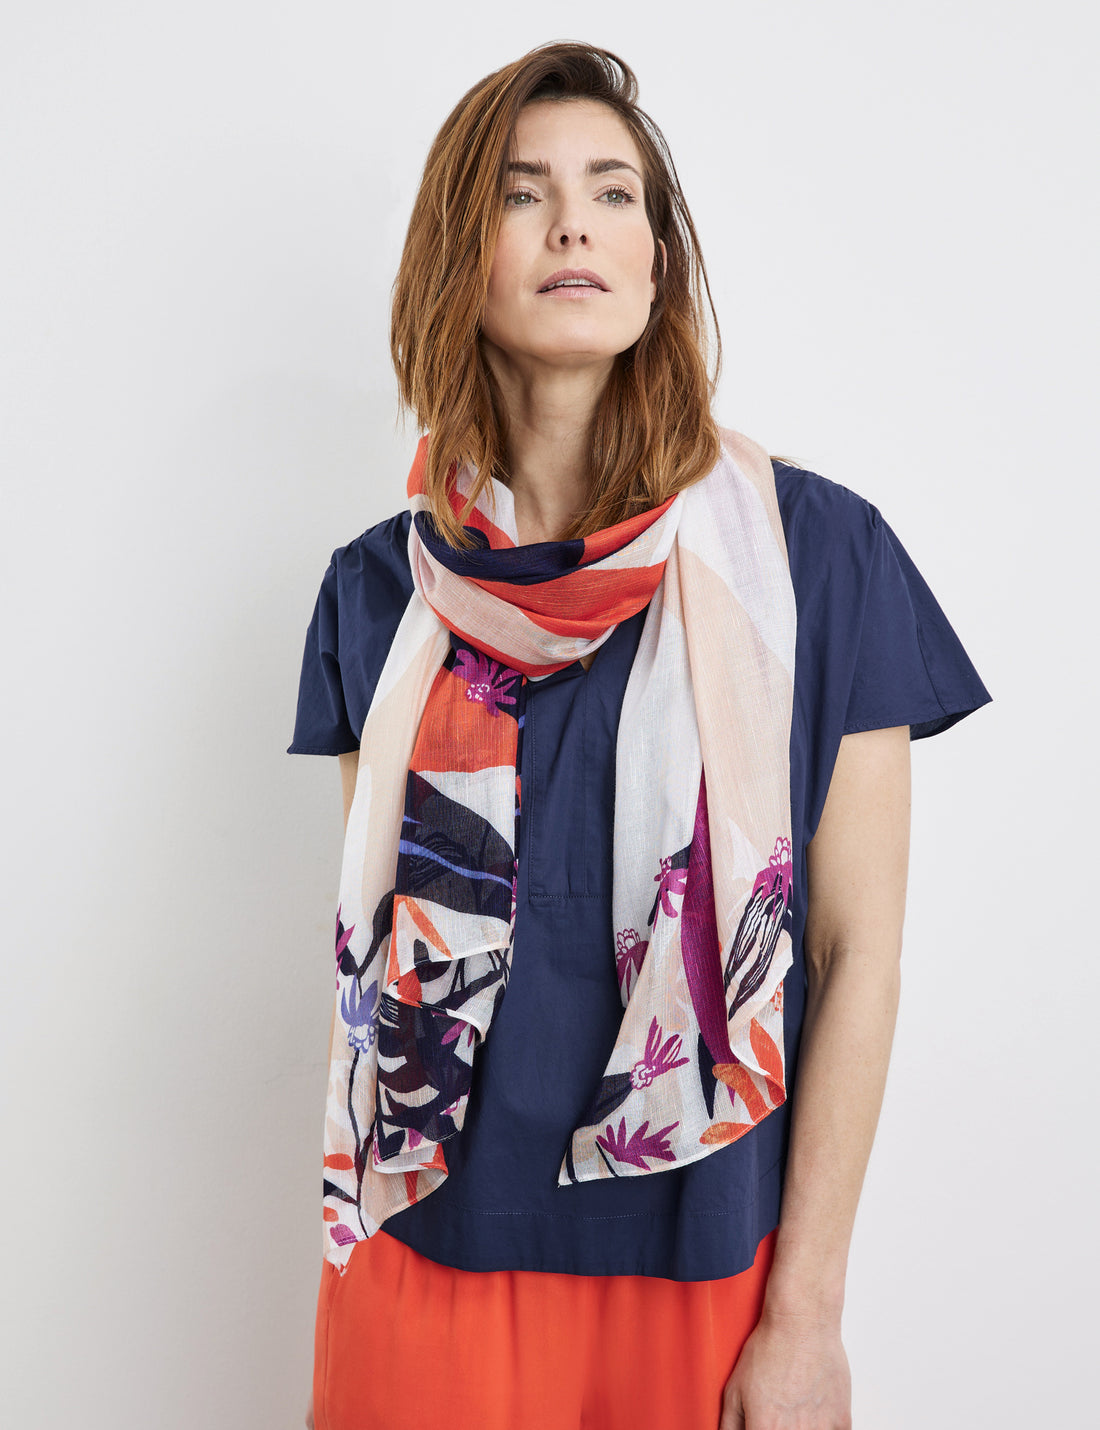 Patterned Scarf With A Floral Pattern